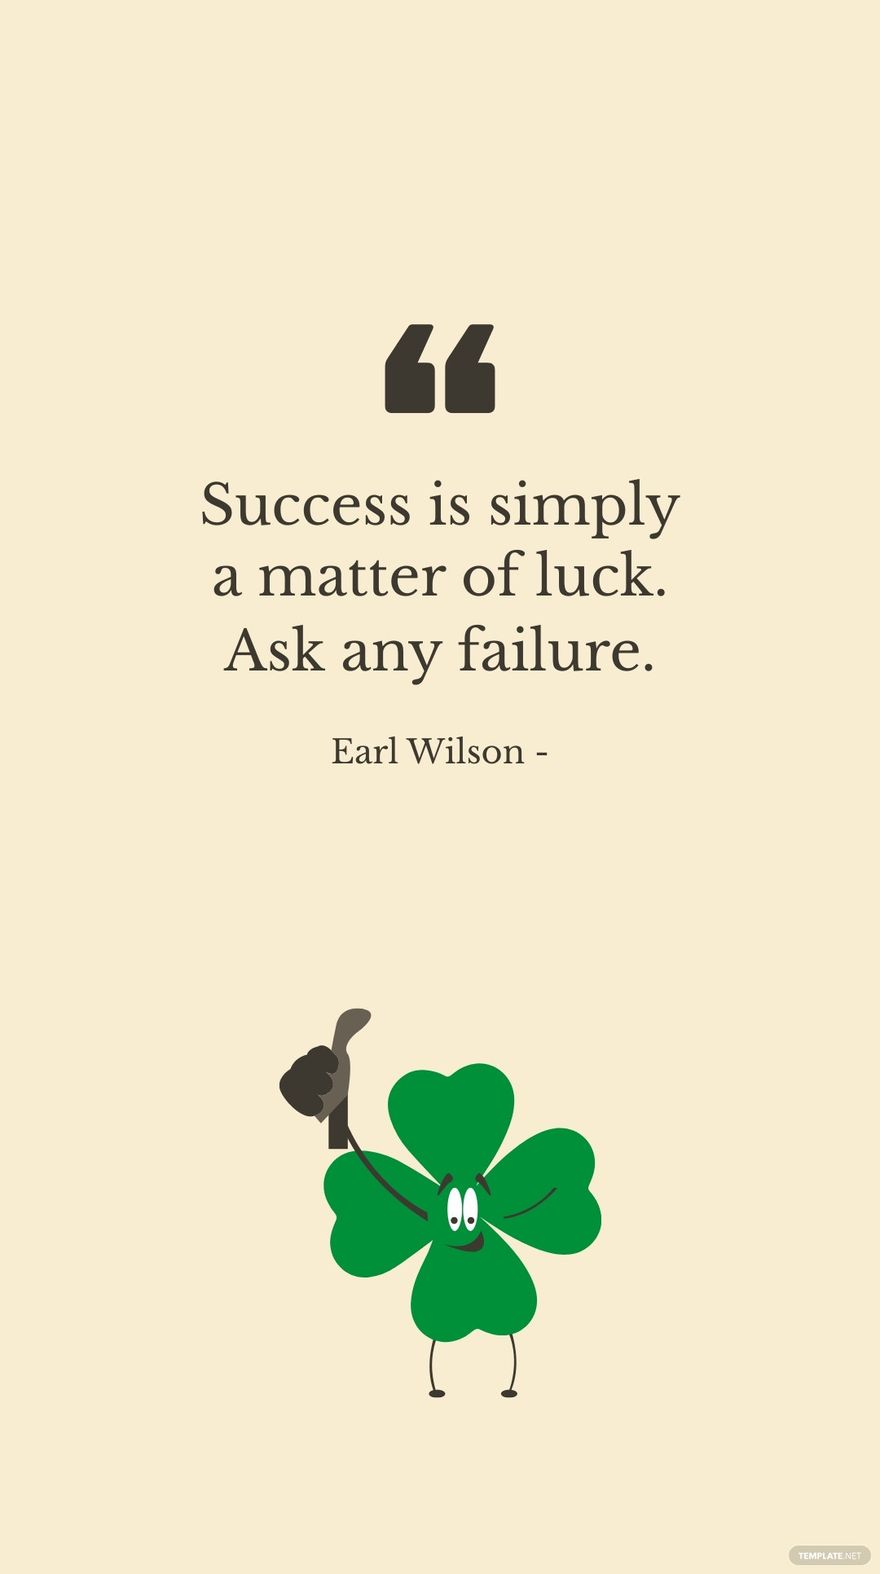 Free Earl Wilson - Success is simply a matter of luck. Ask any failure. in JPG